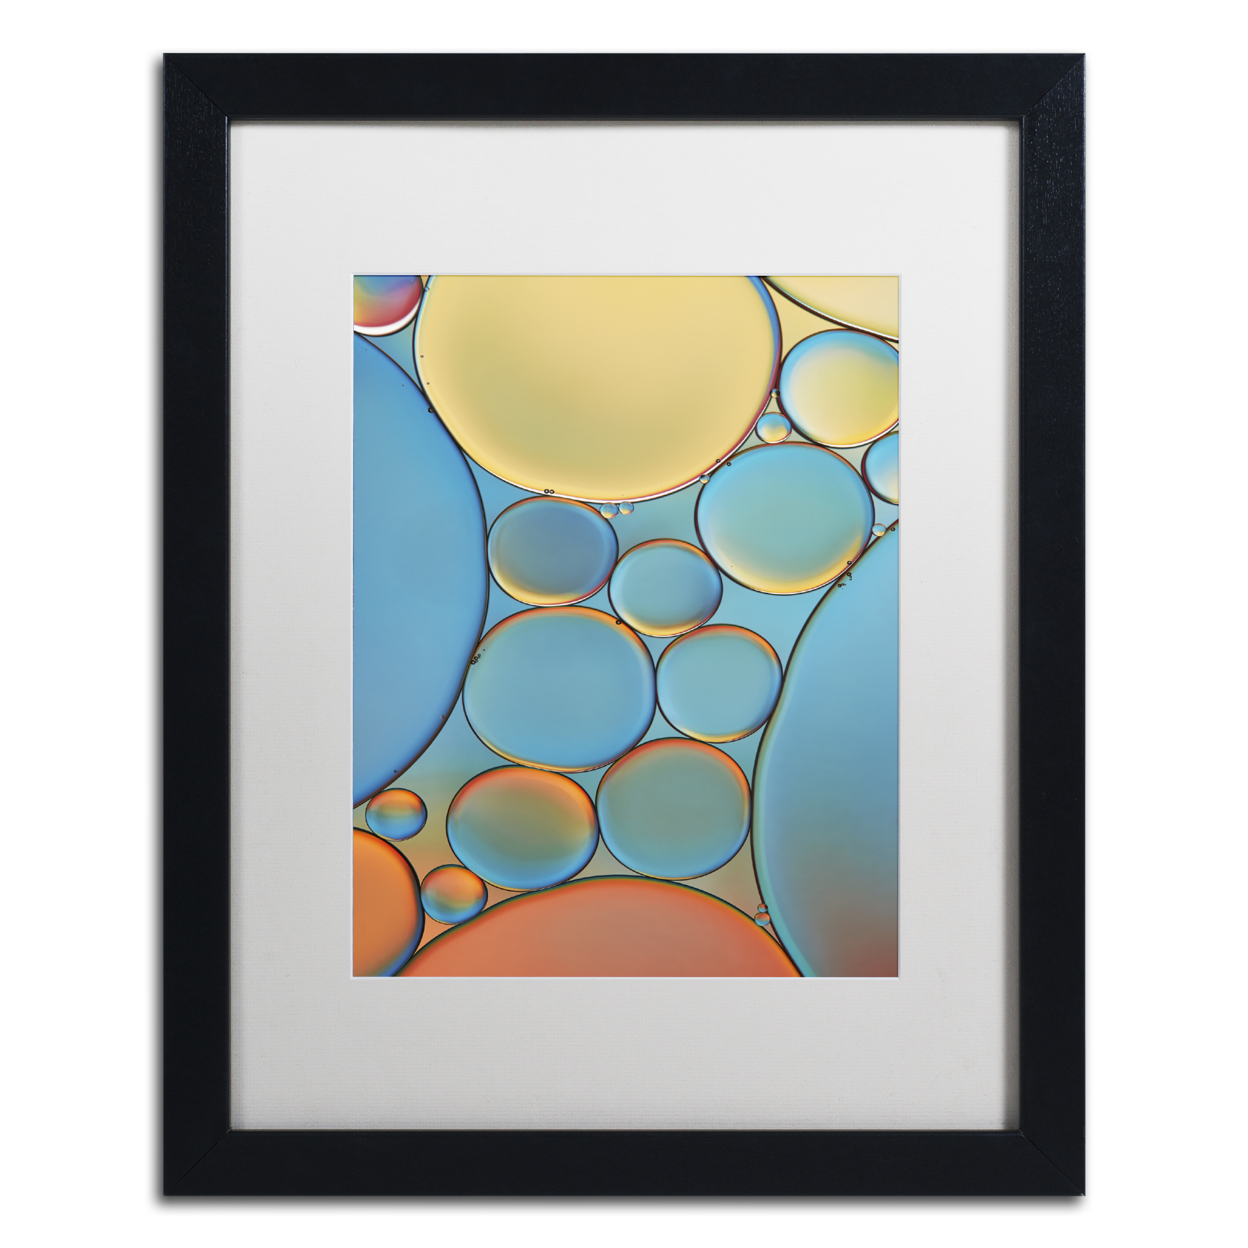 Cora Niele 'Blue And Apricot Drops' Black Wooden Framed Art 18 X 22 Inches